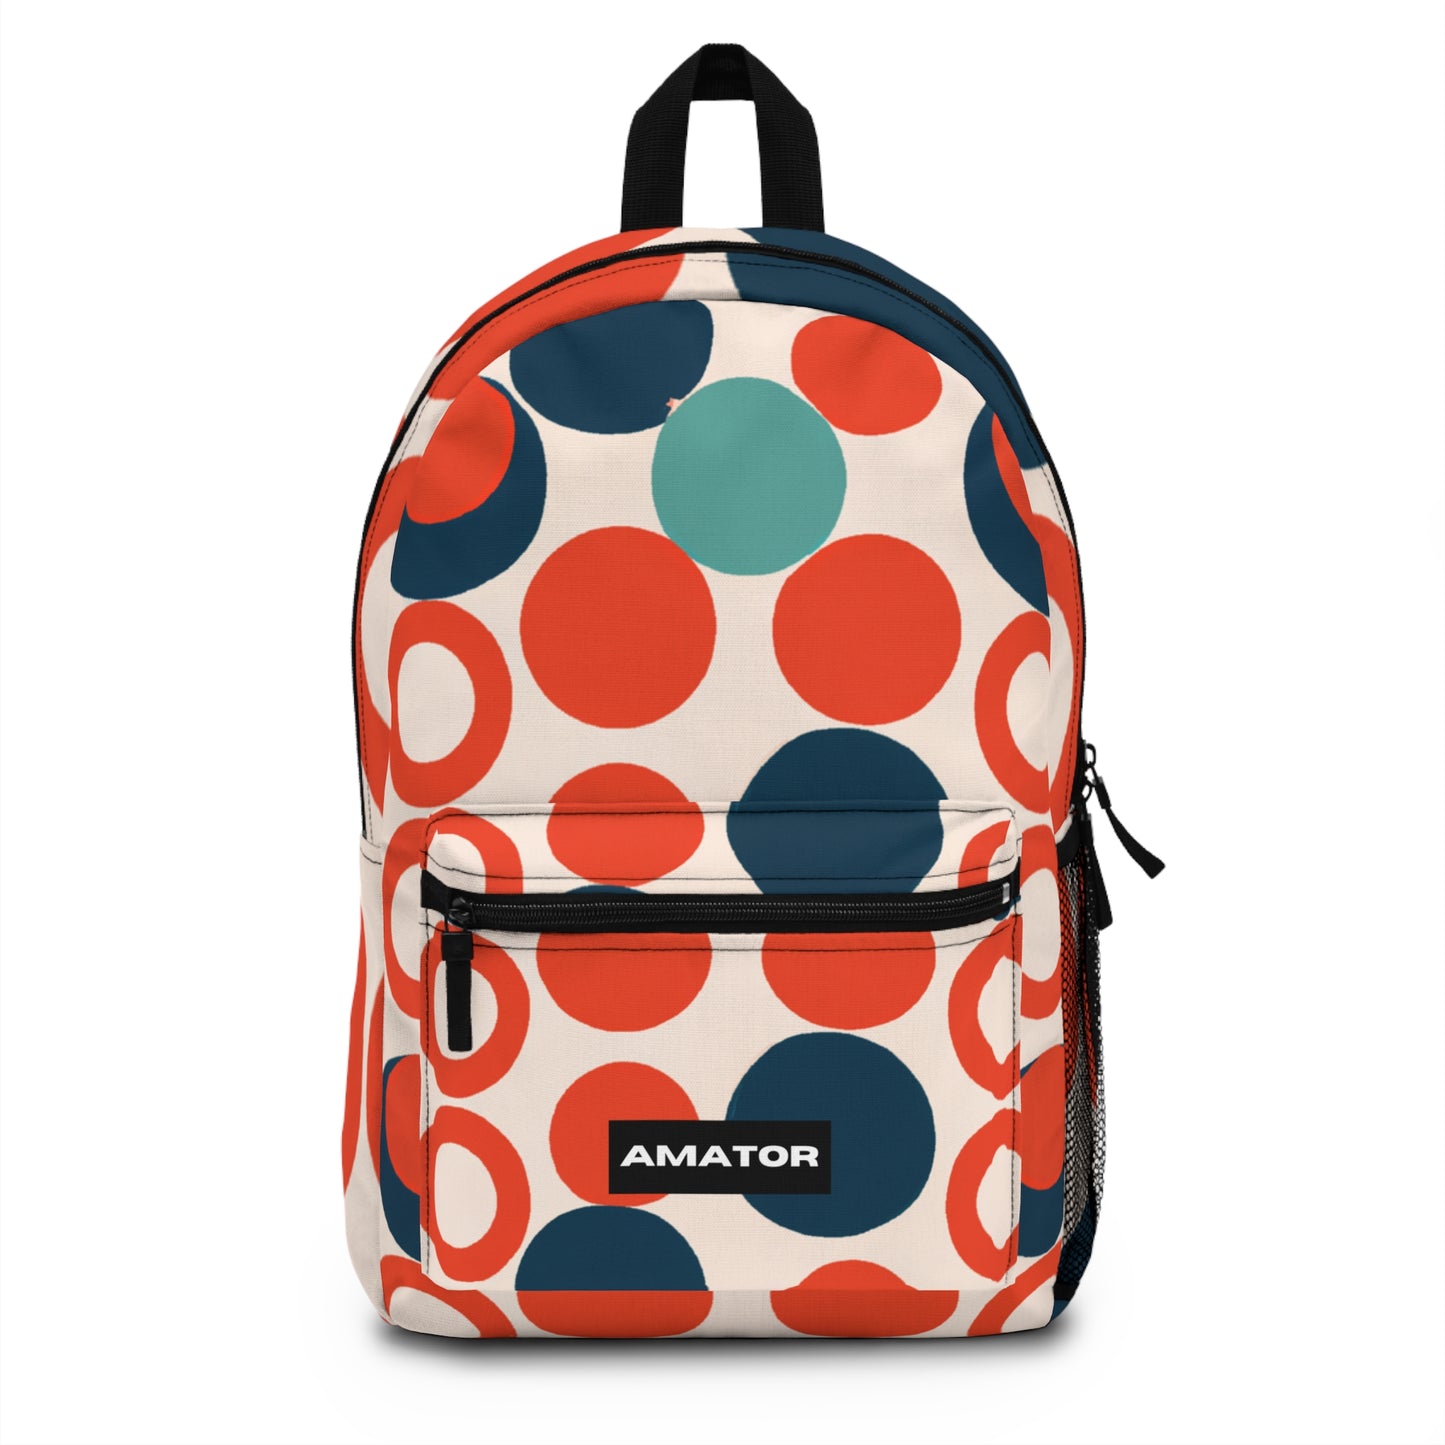 Claudia Giotto. Backpack